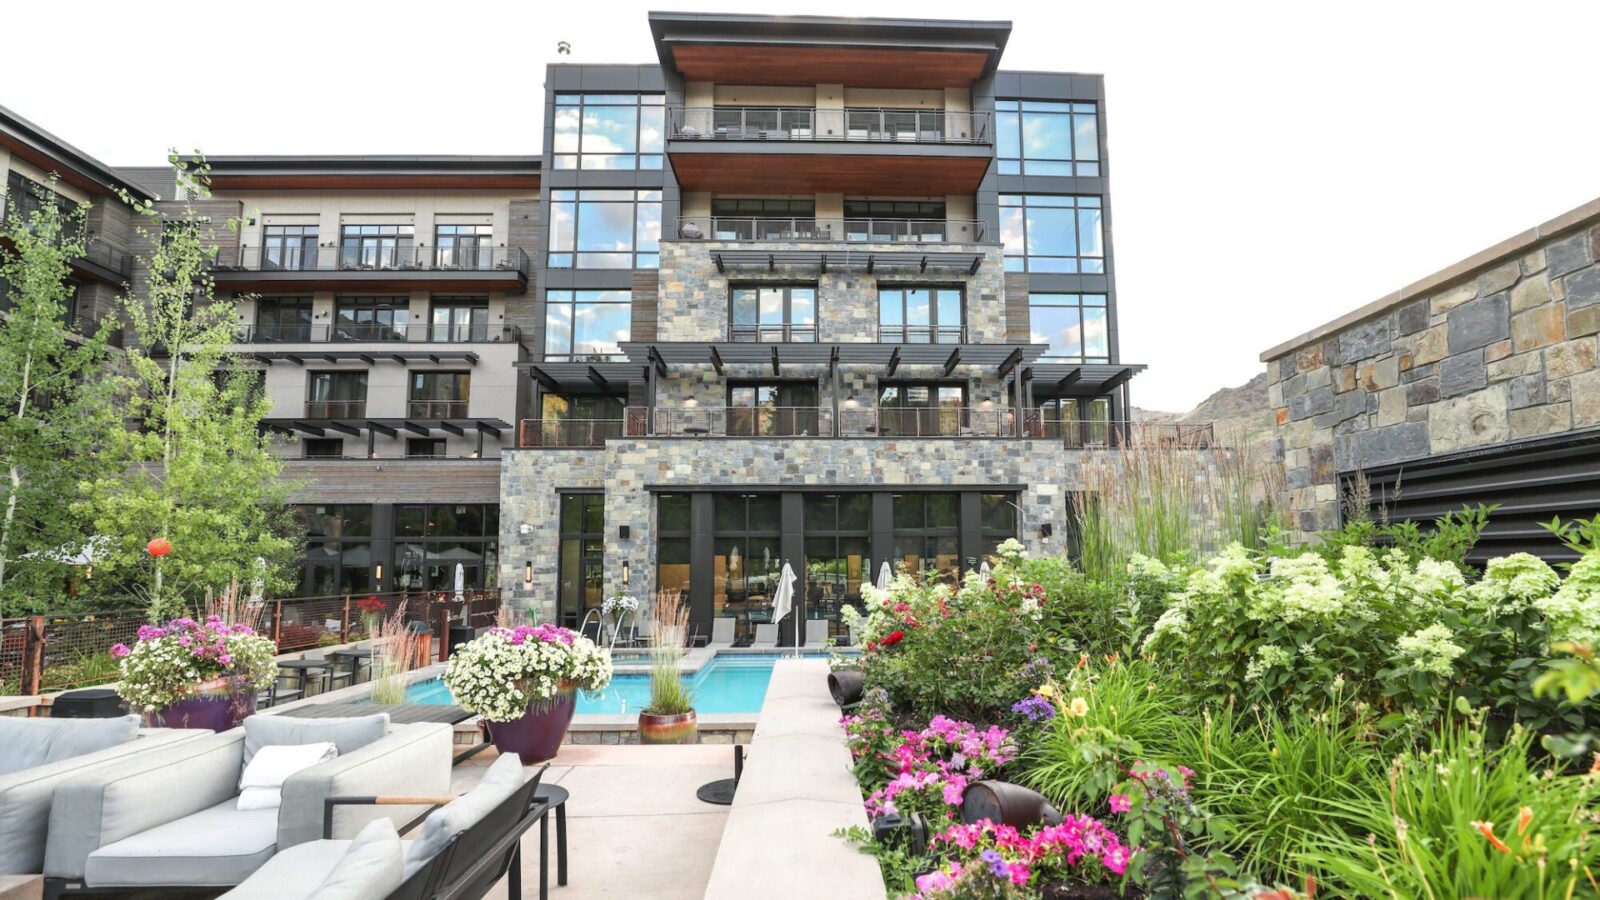 patio, building, and pool at the Limelight Ketchum Hotel